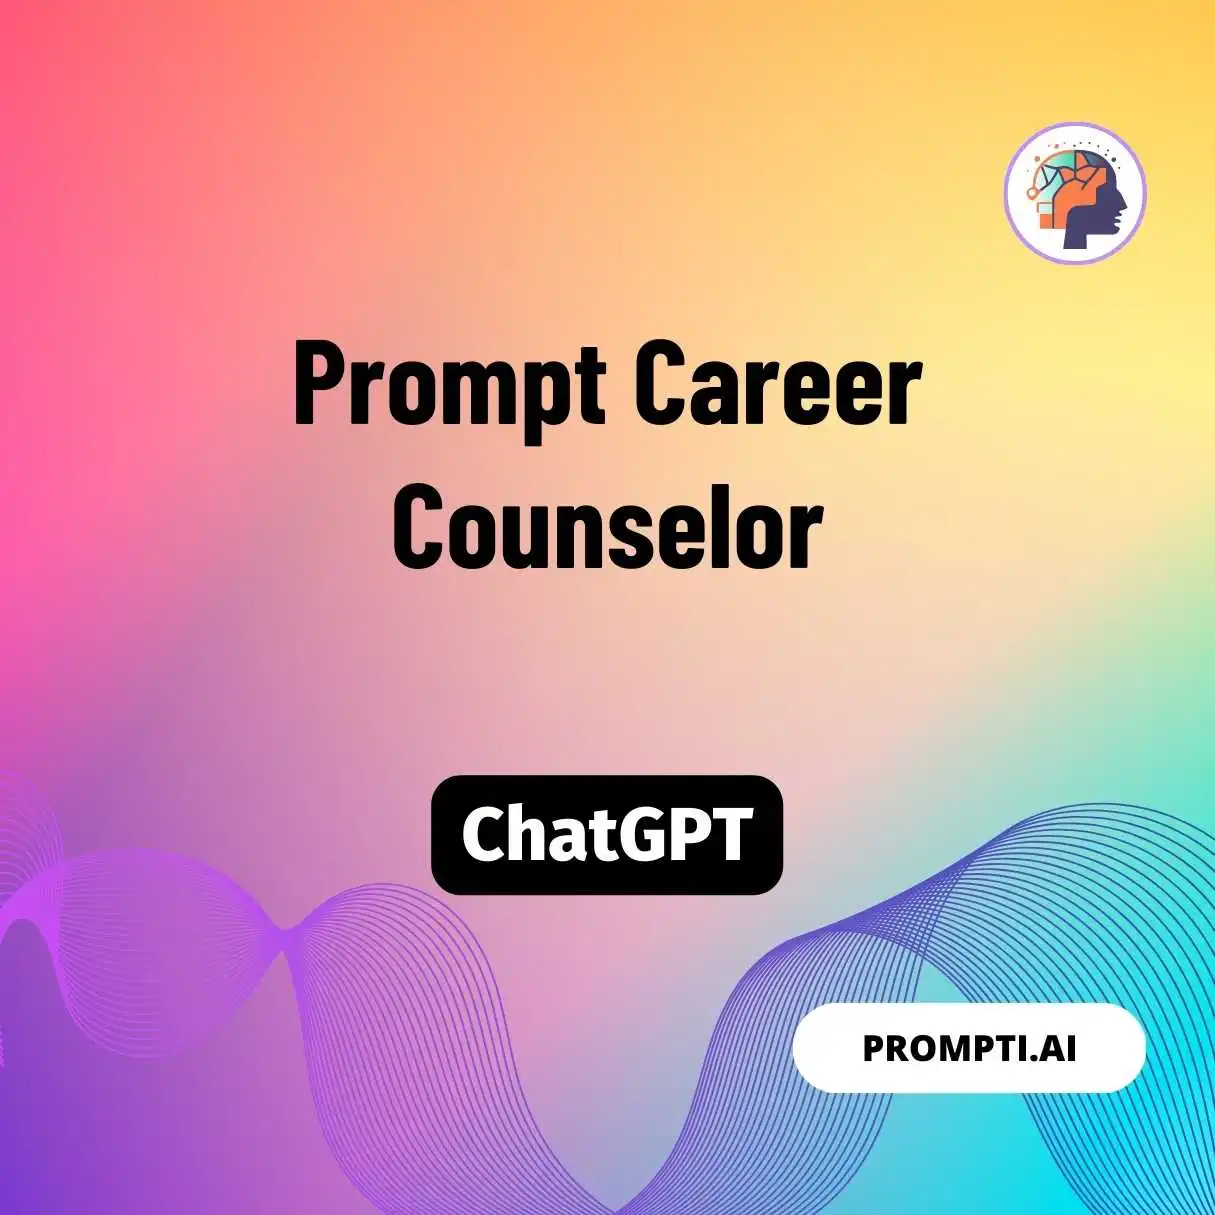 Prompt Career Counselor